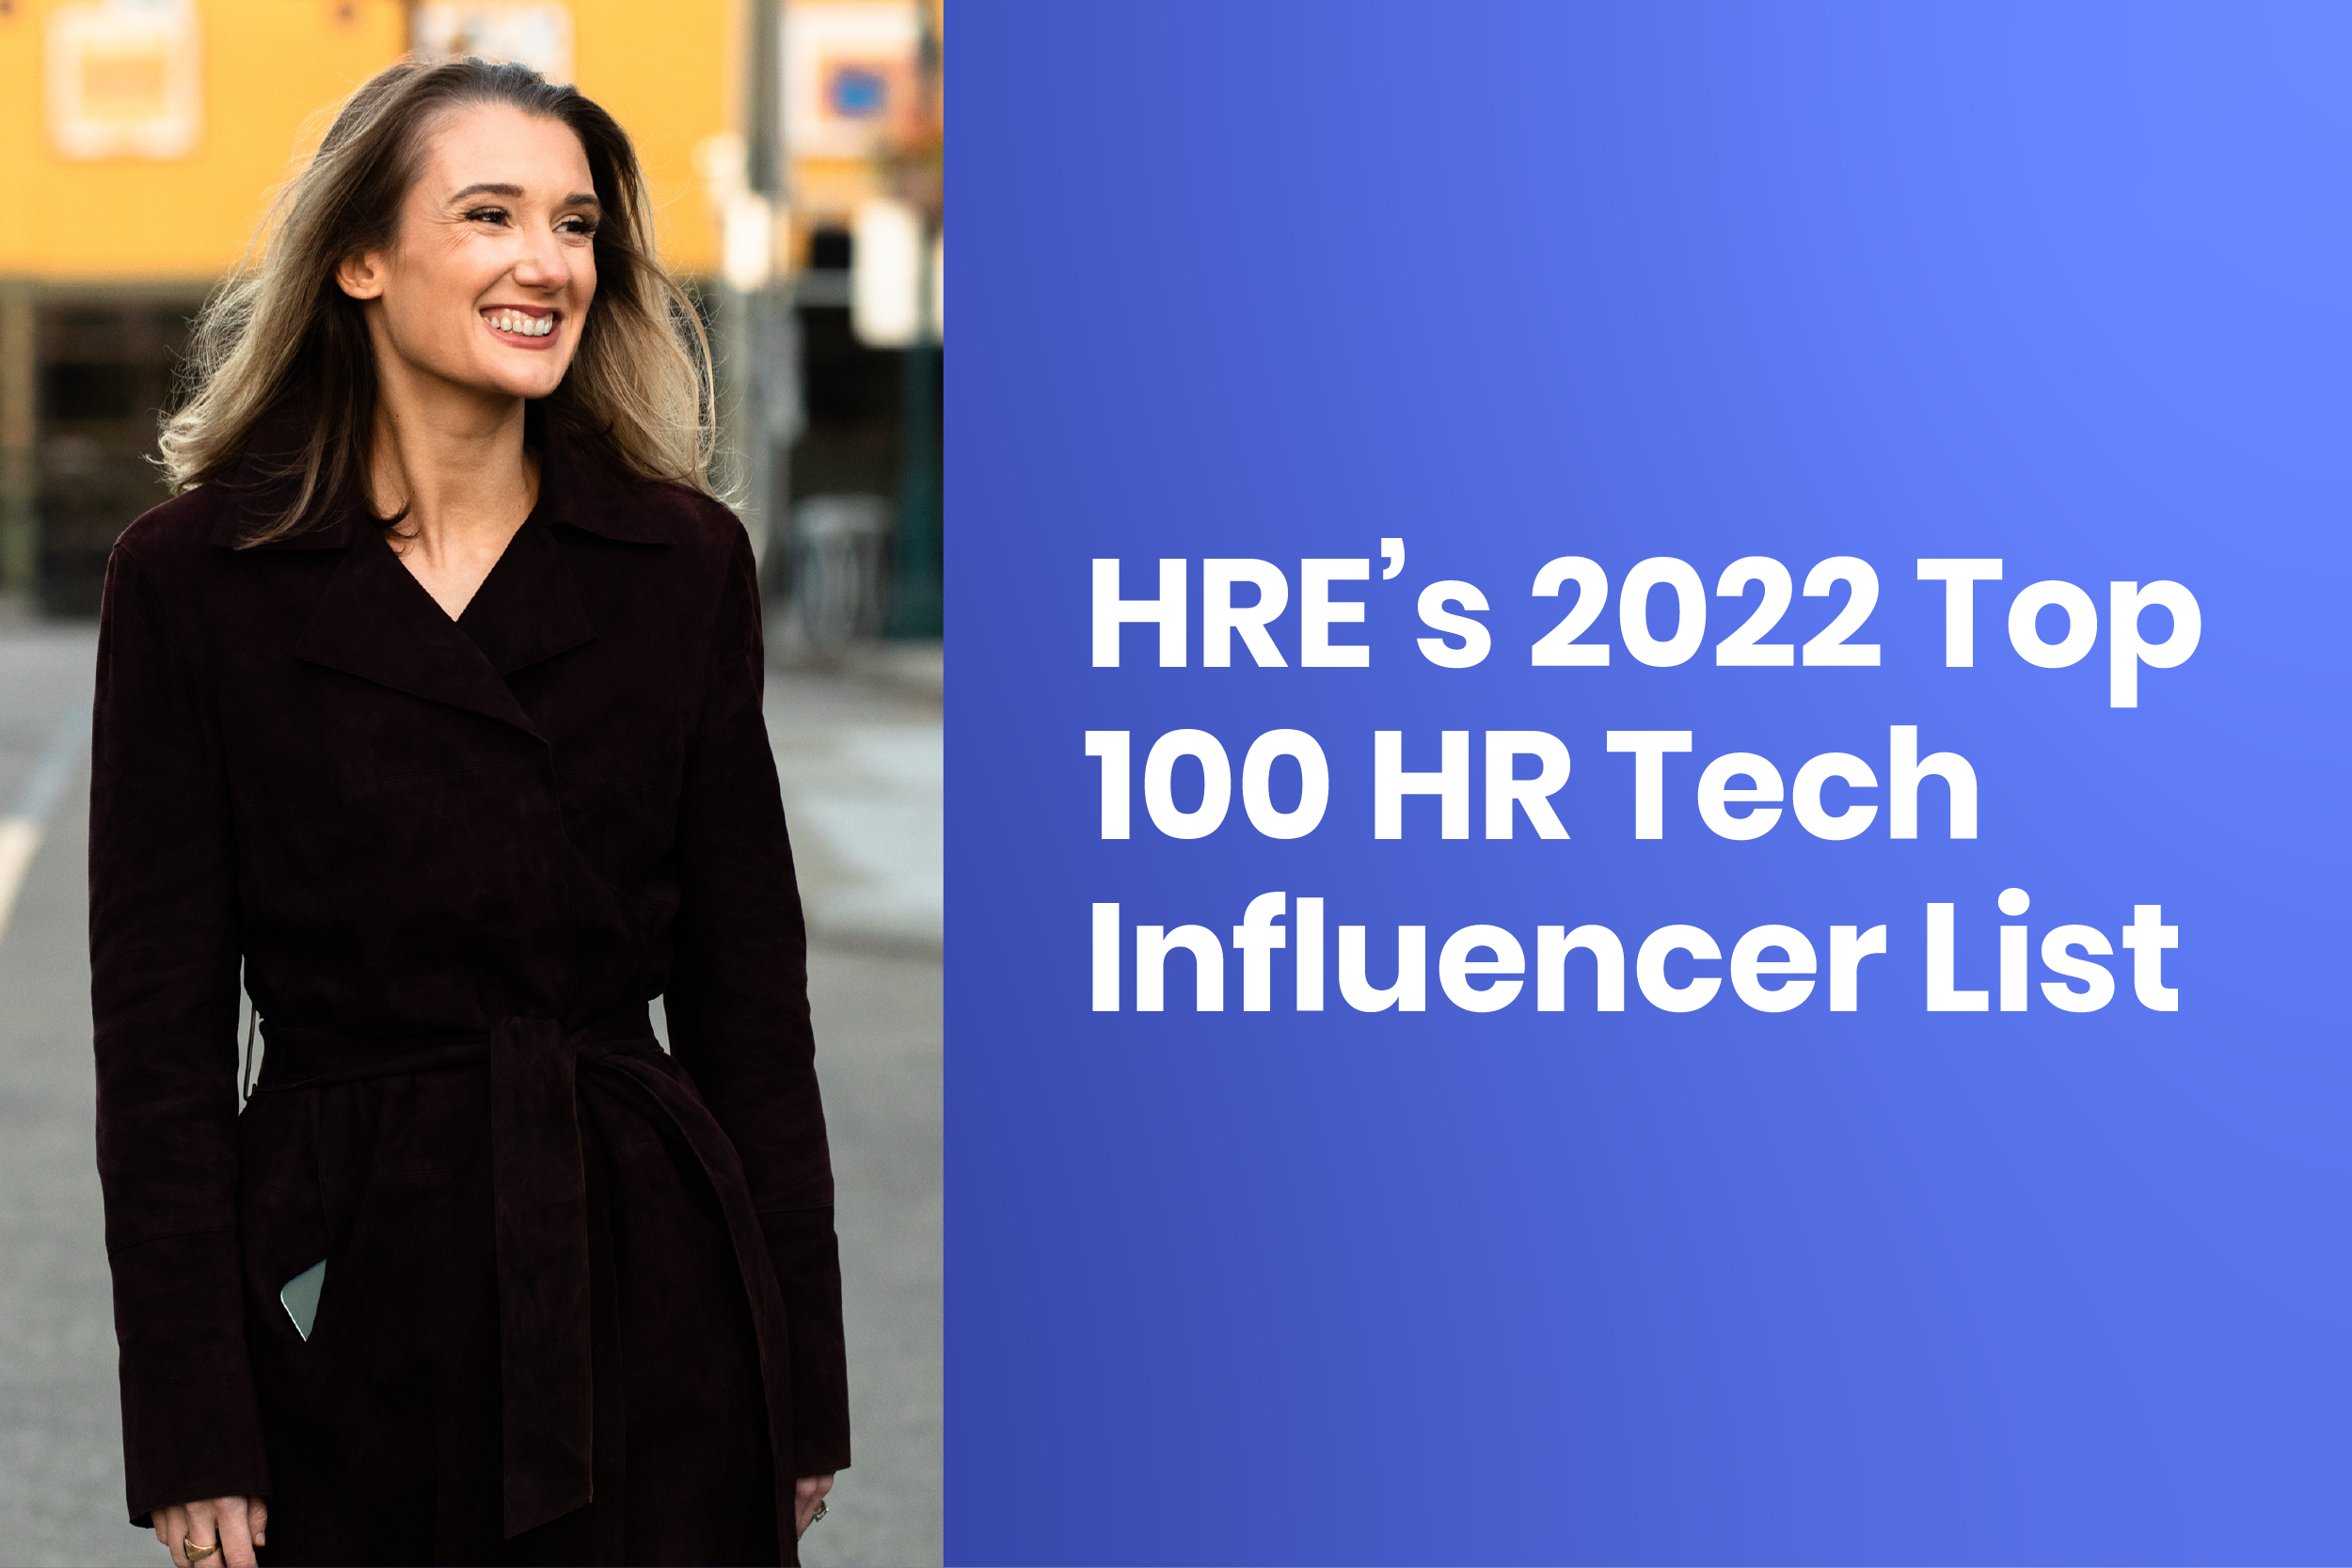 The Mom Project Founder & CEO Allison Robinson Named A 2022 Top HR Tech Influencer